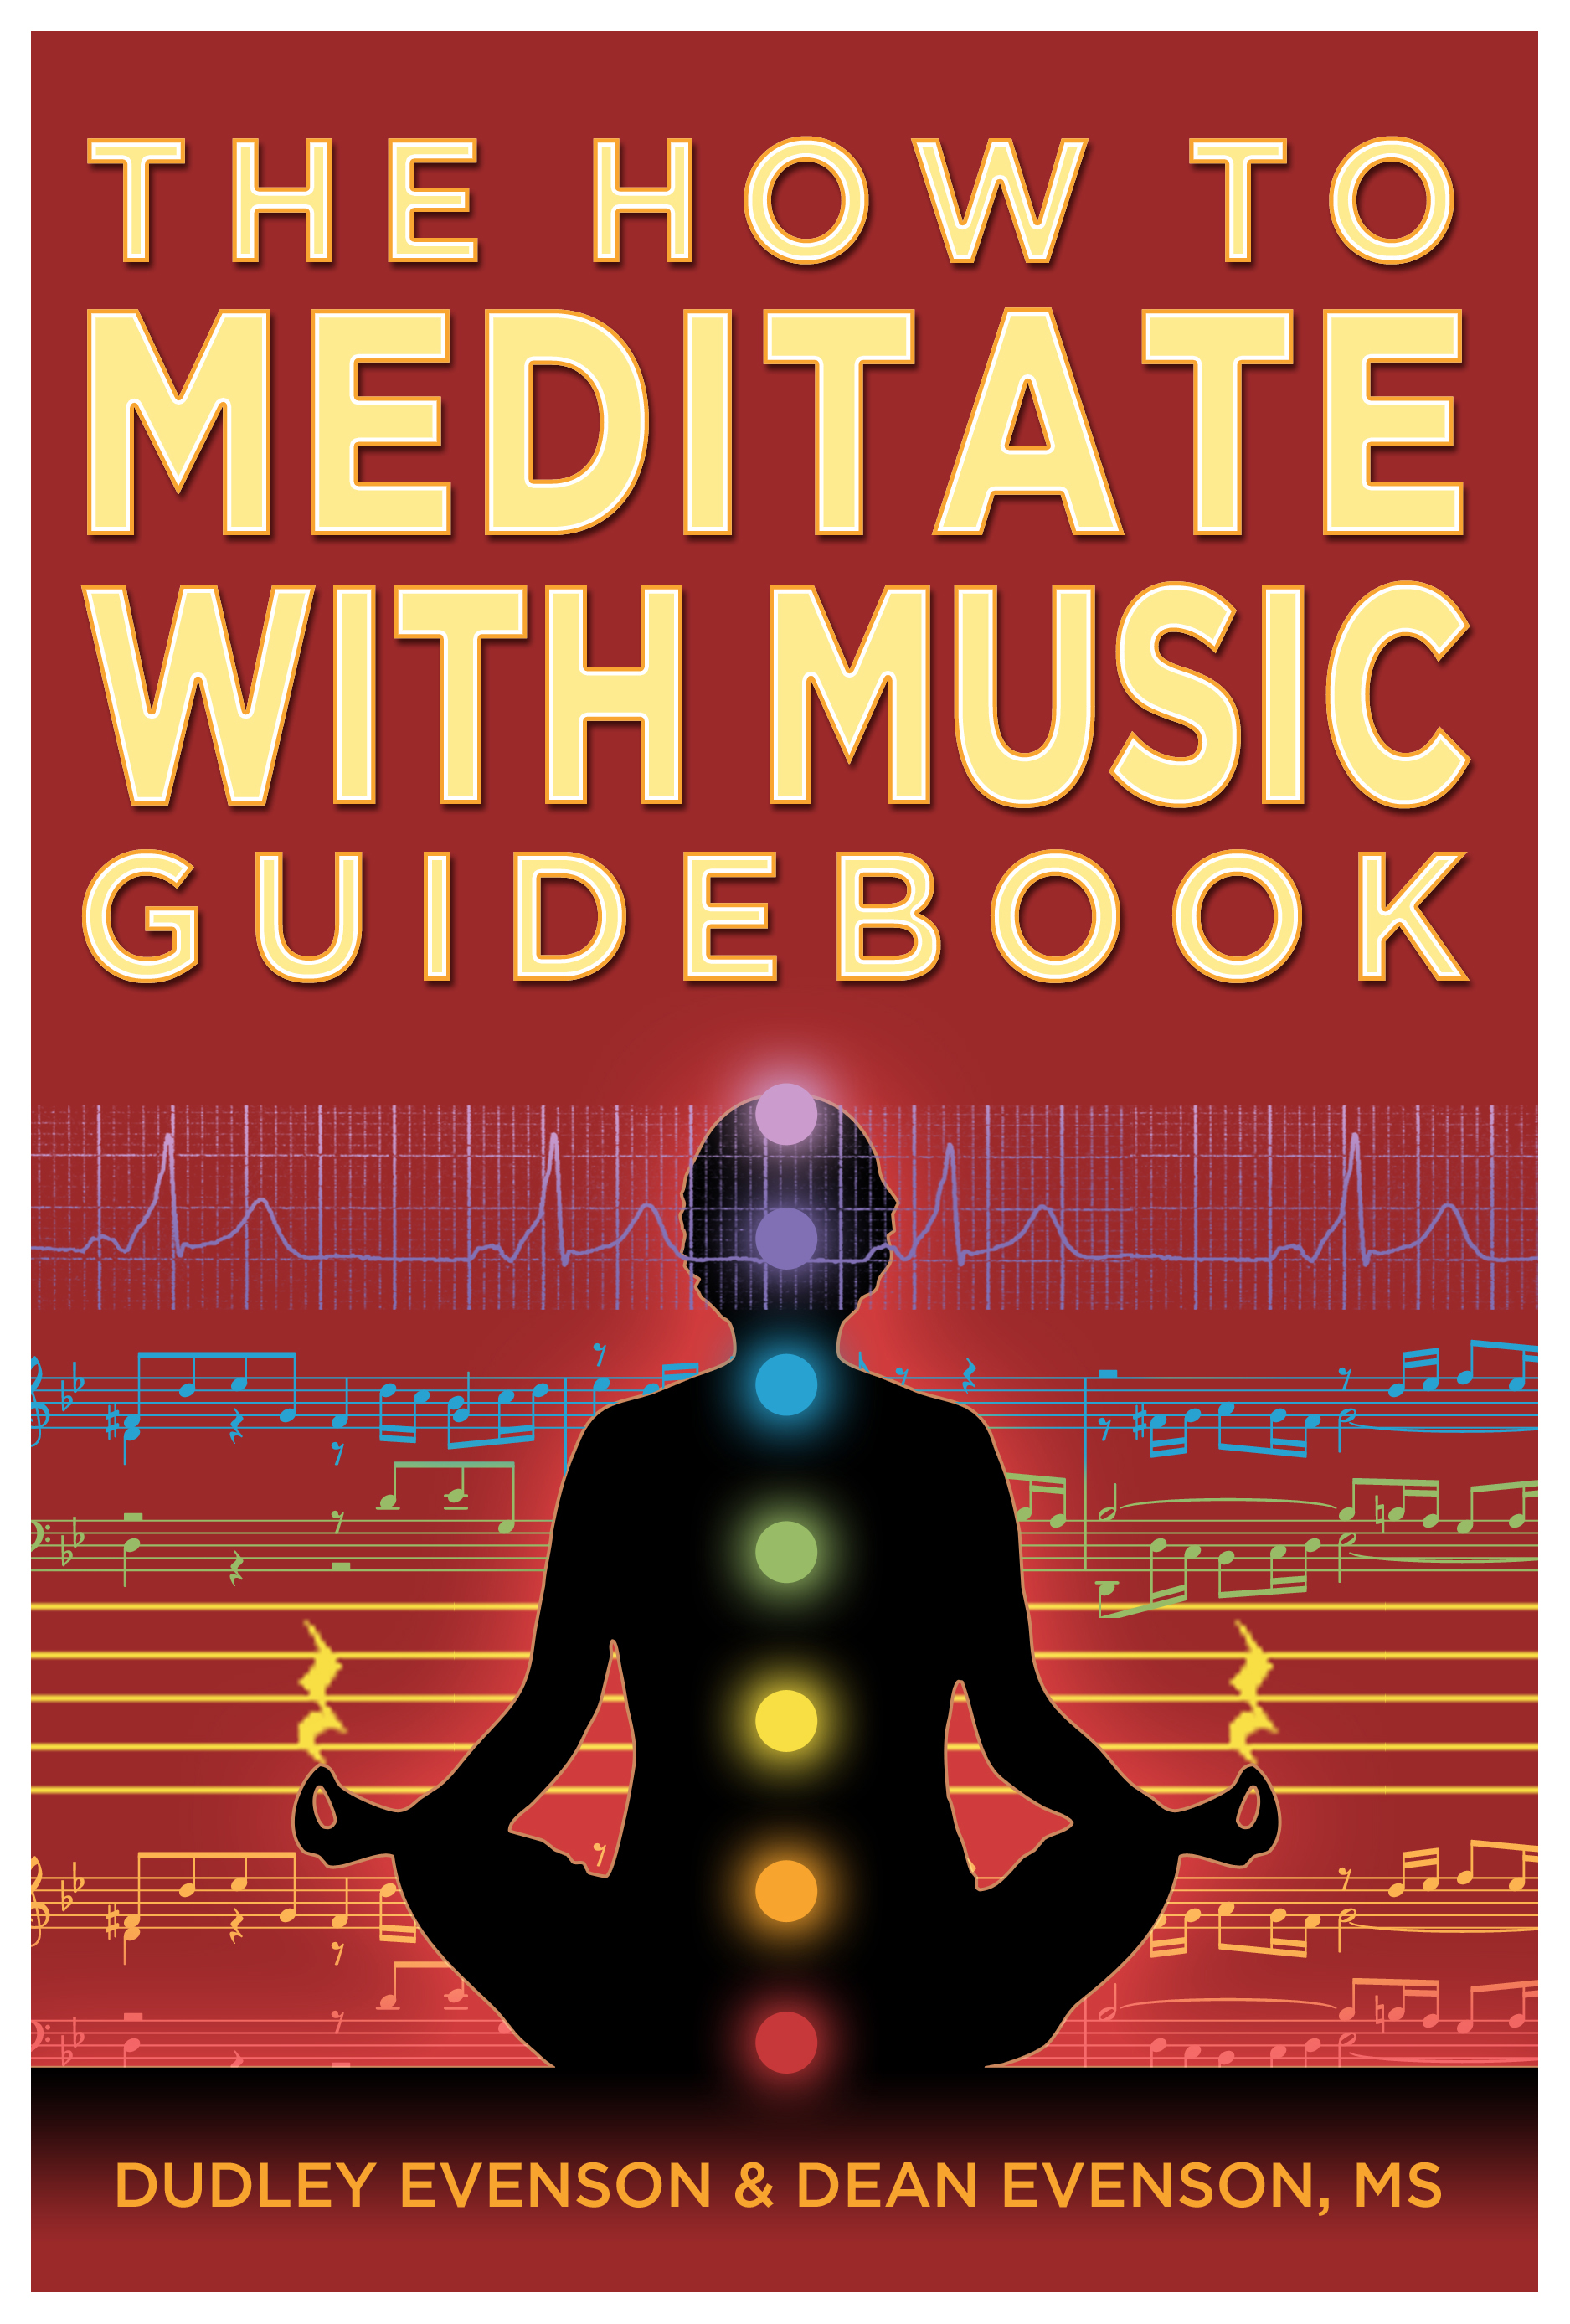 Meditate Book Cover Mockups Round 1